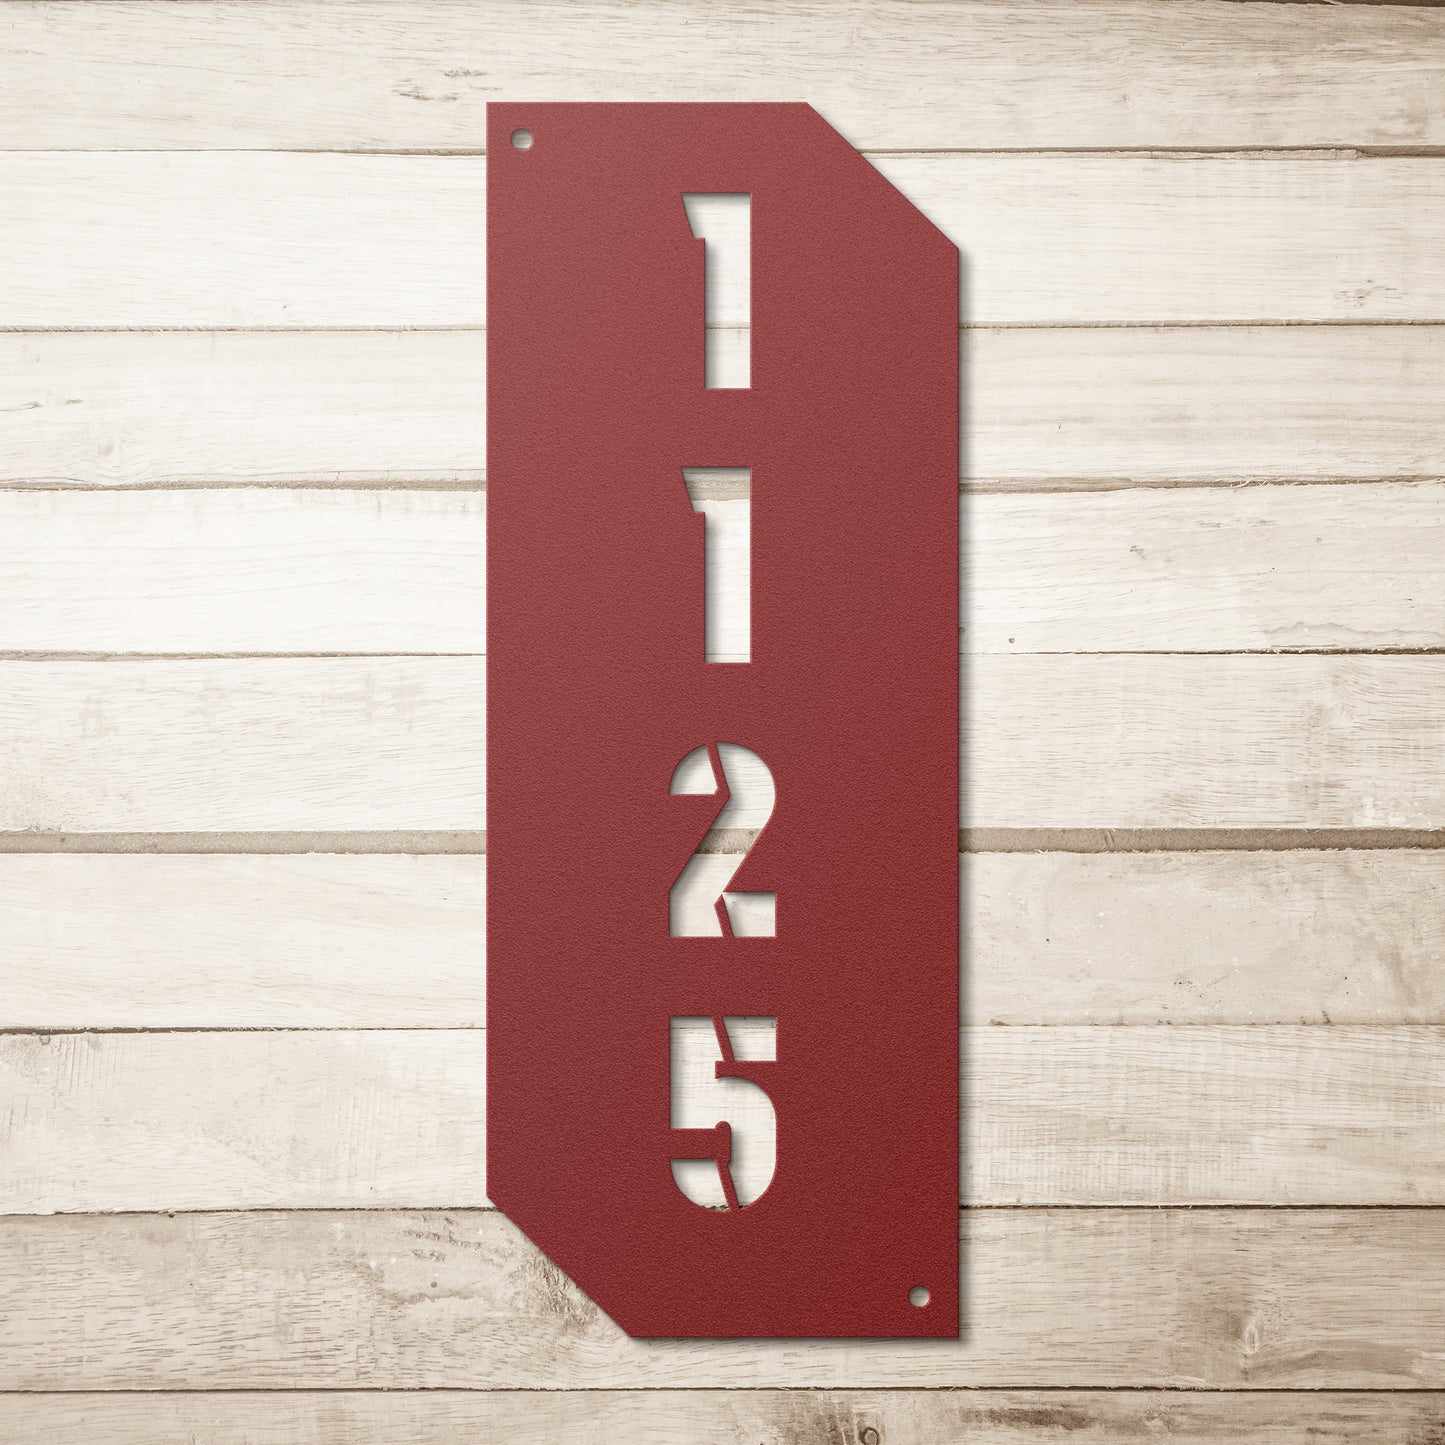 Vertical Number Lodge, Cabin, Ranch or Home Personalized Metal Artwork